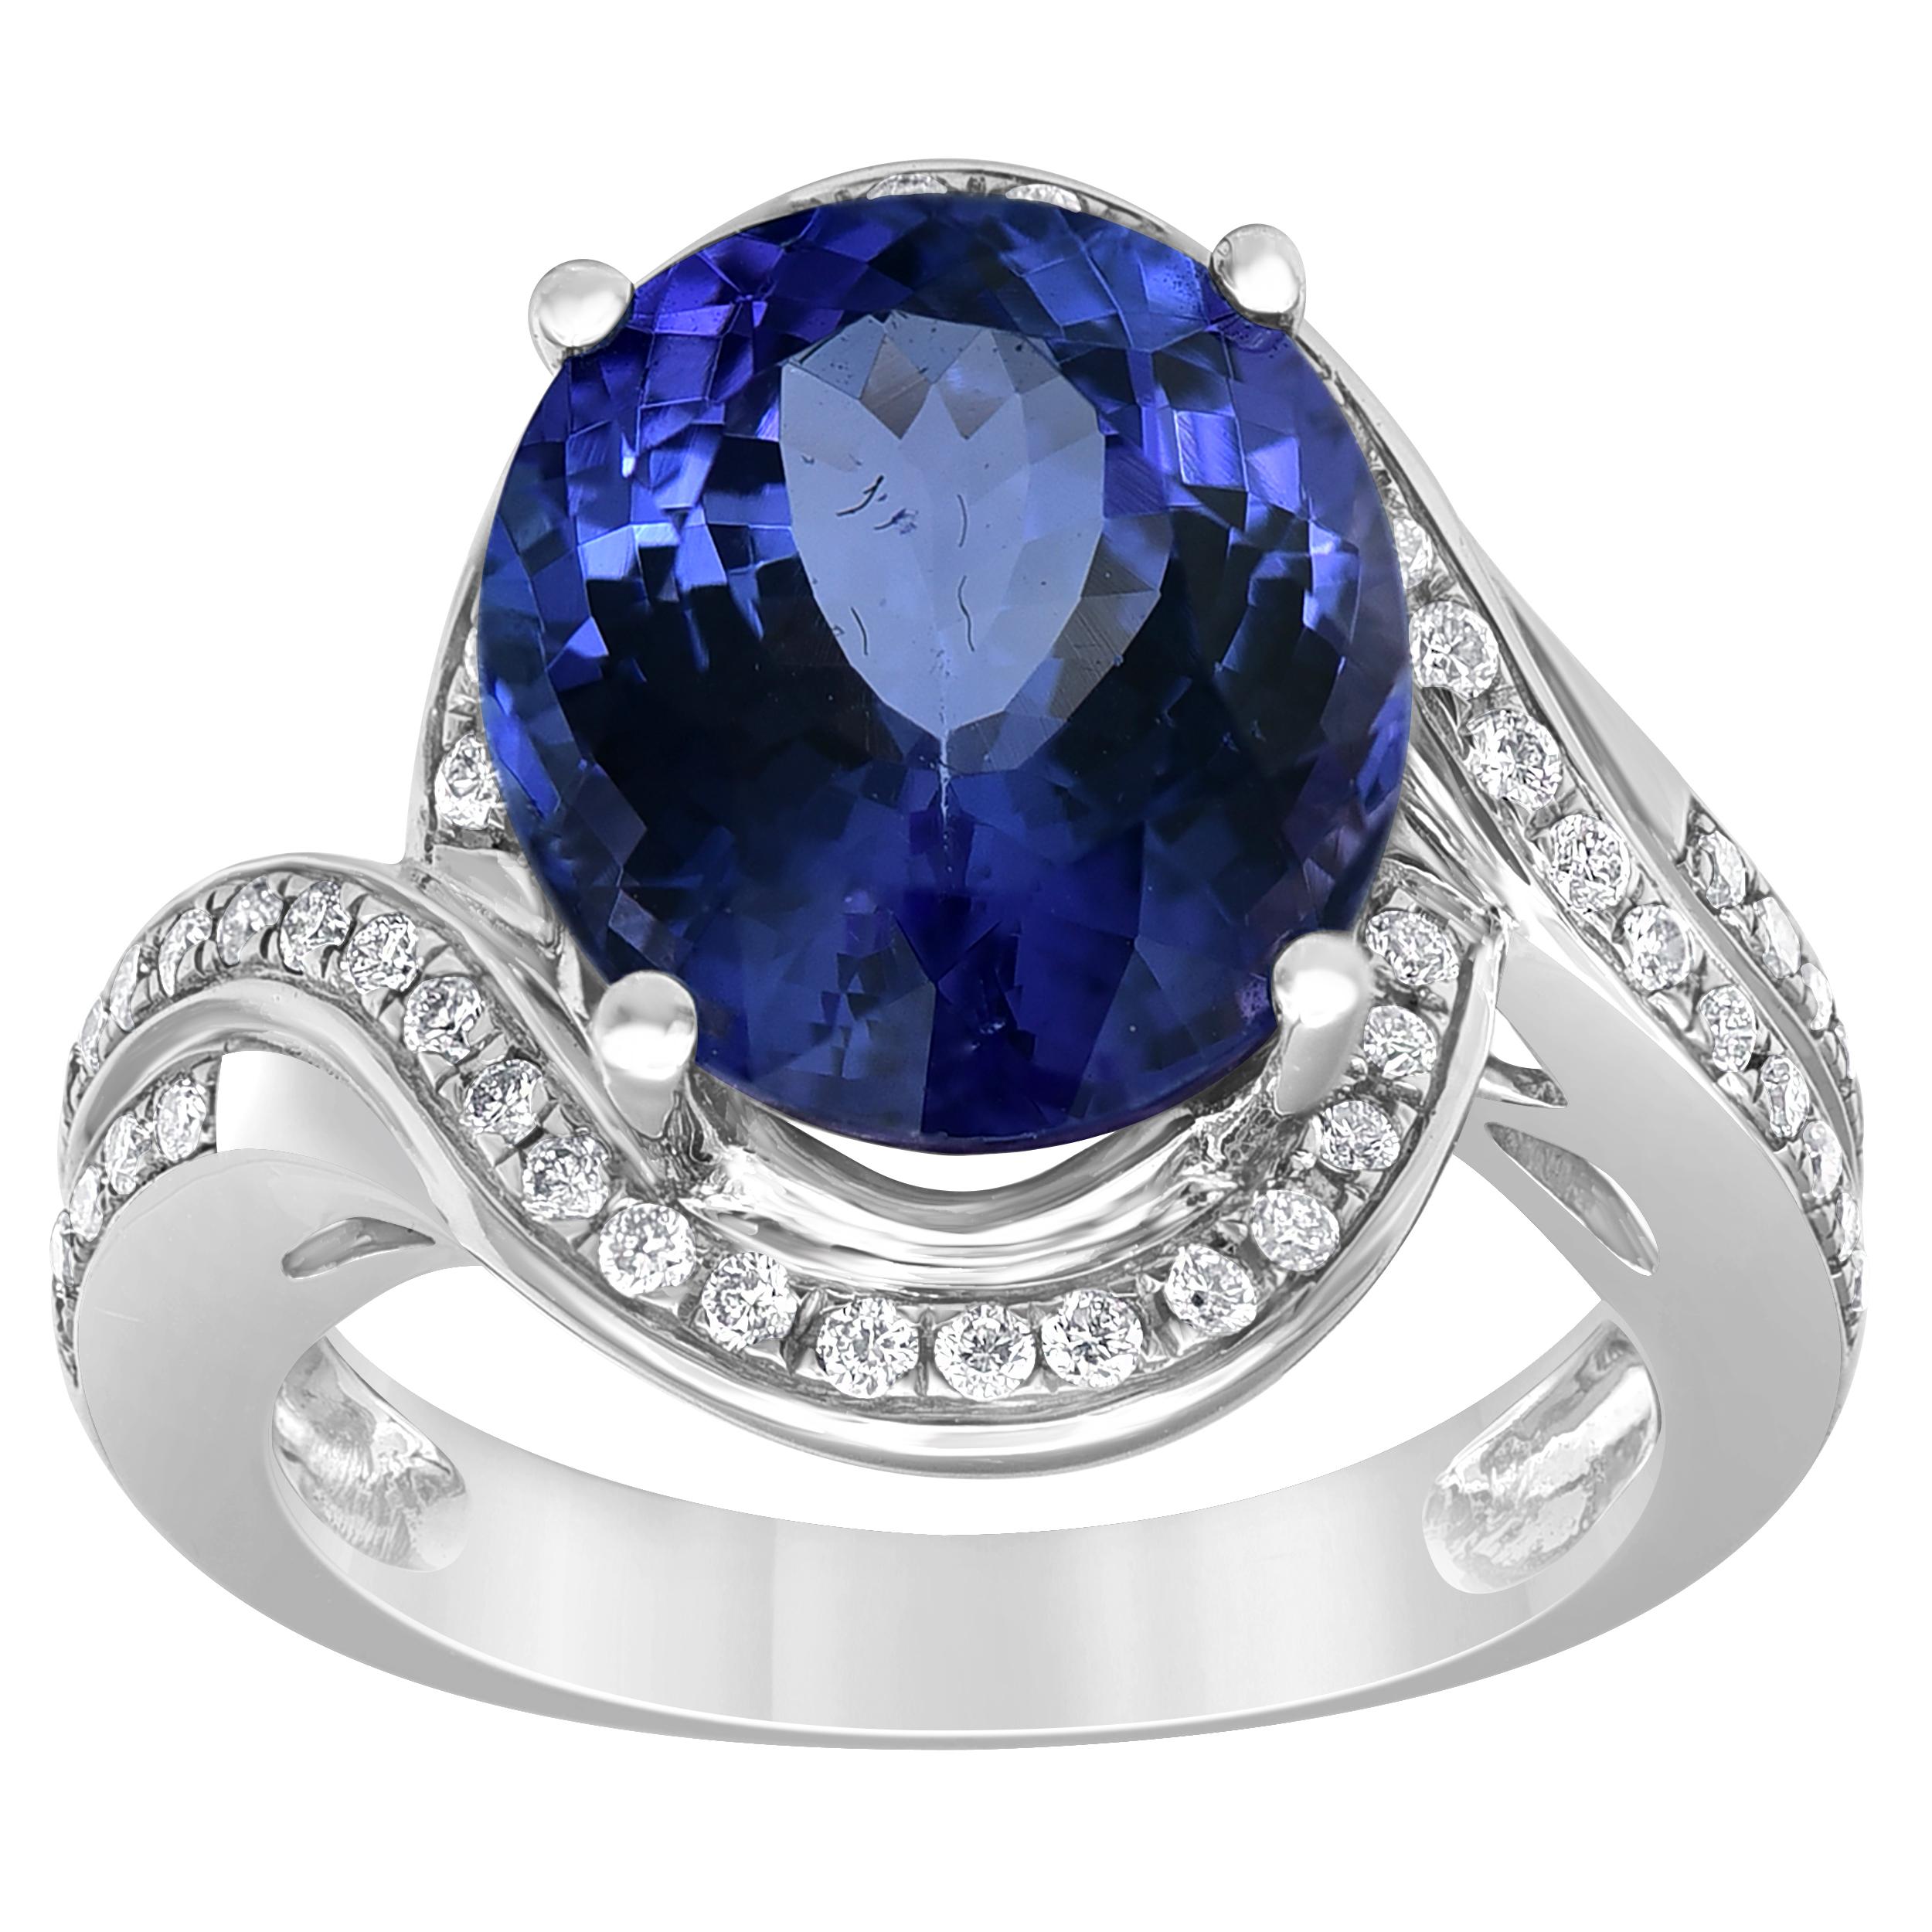 This elegant engagement ring features a gorgeous Prong-set Oval Shape Blue Tanzanite in a Centred. The diamond accents (Color- I, Clarity - I2) set along these wrapped edges provide a great contrast to the rich colour of this Tanzanite Stone. While